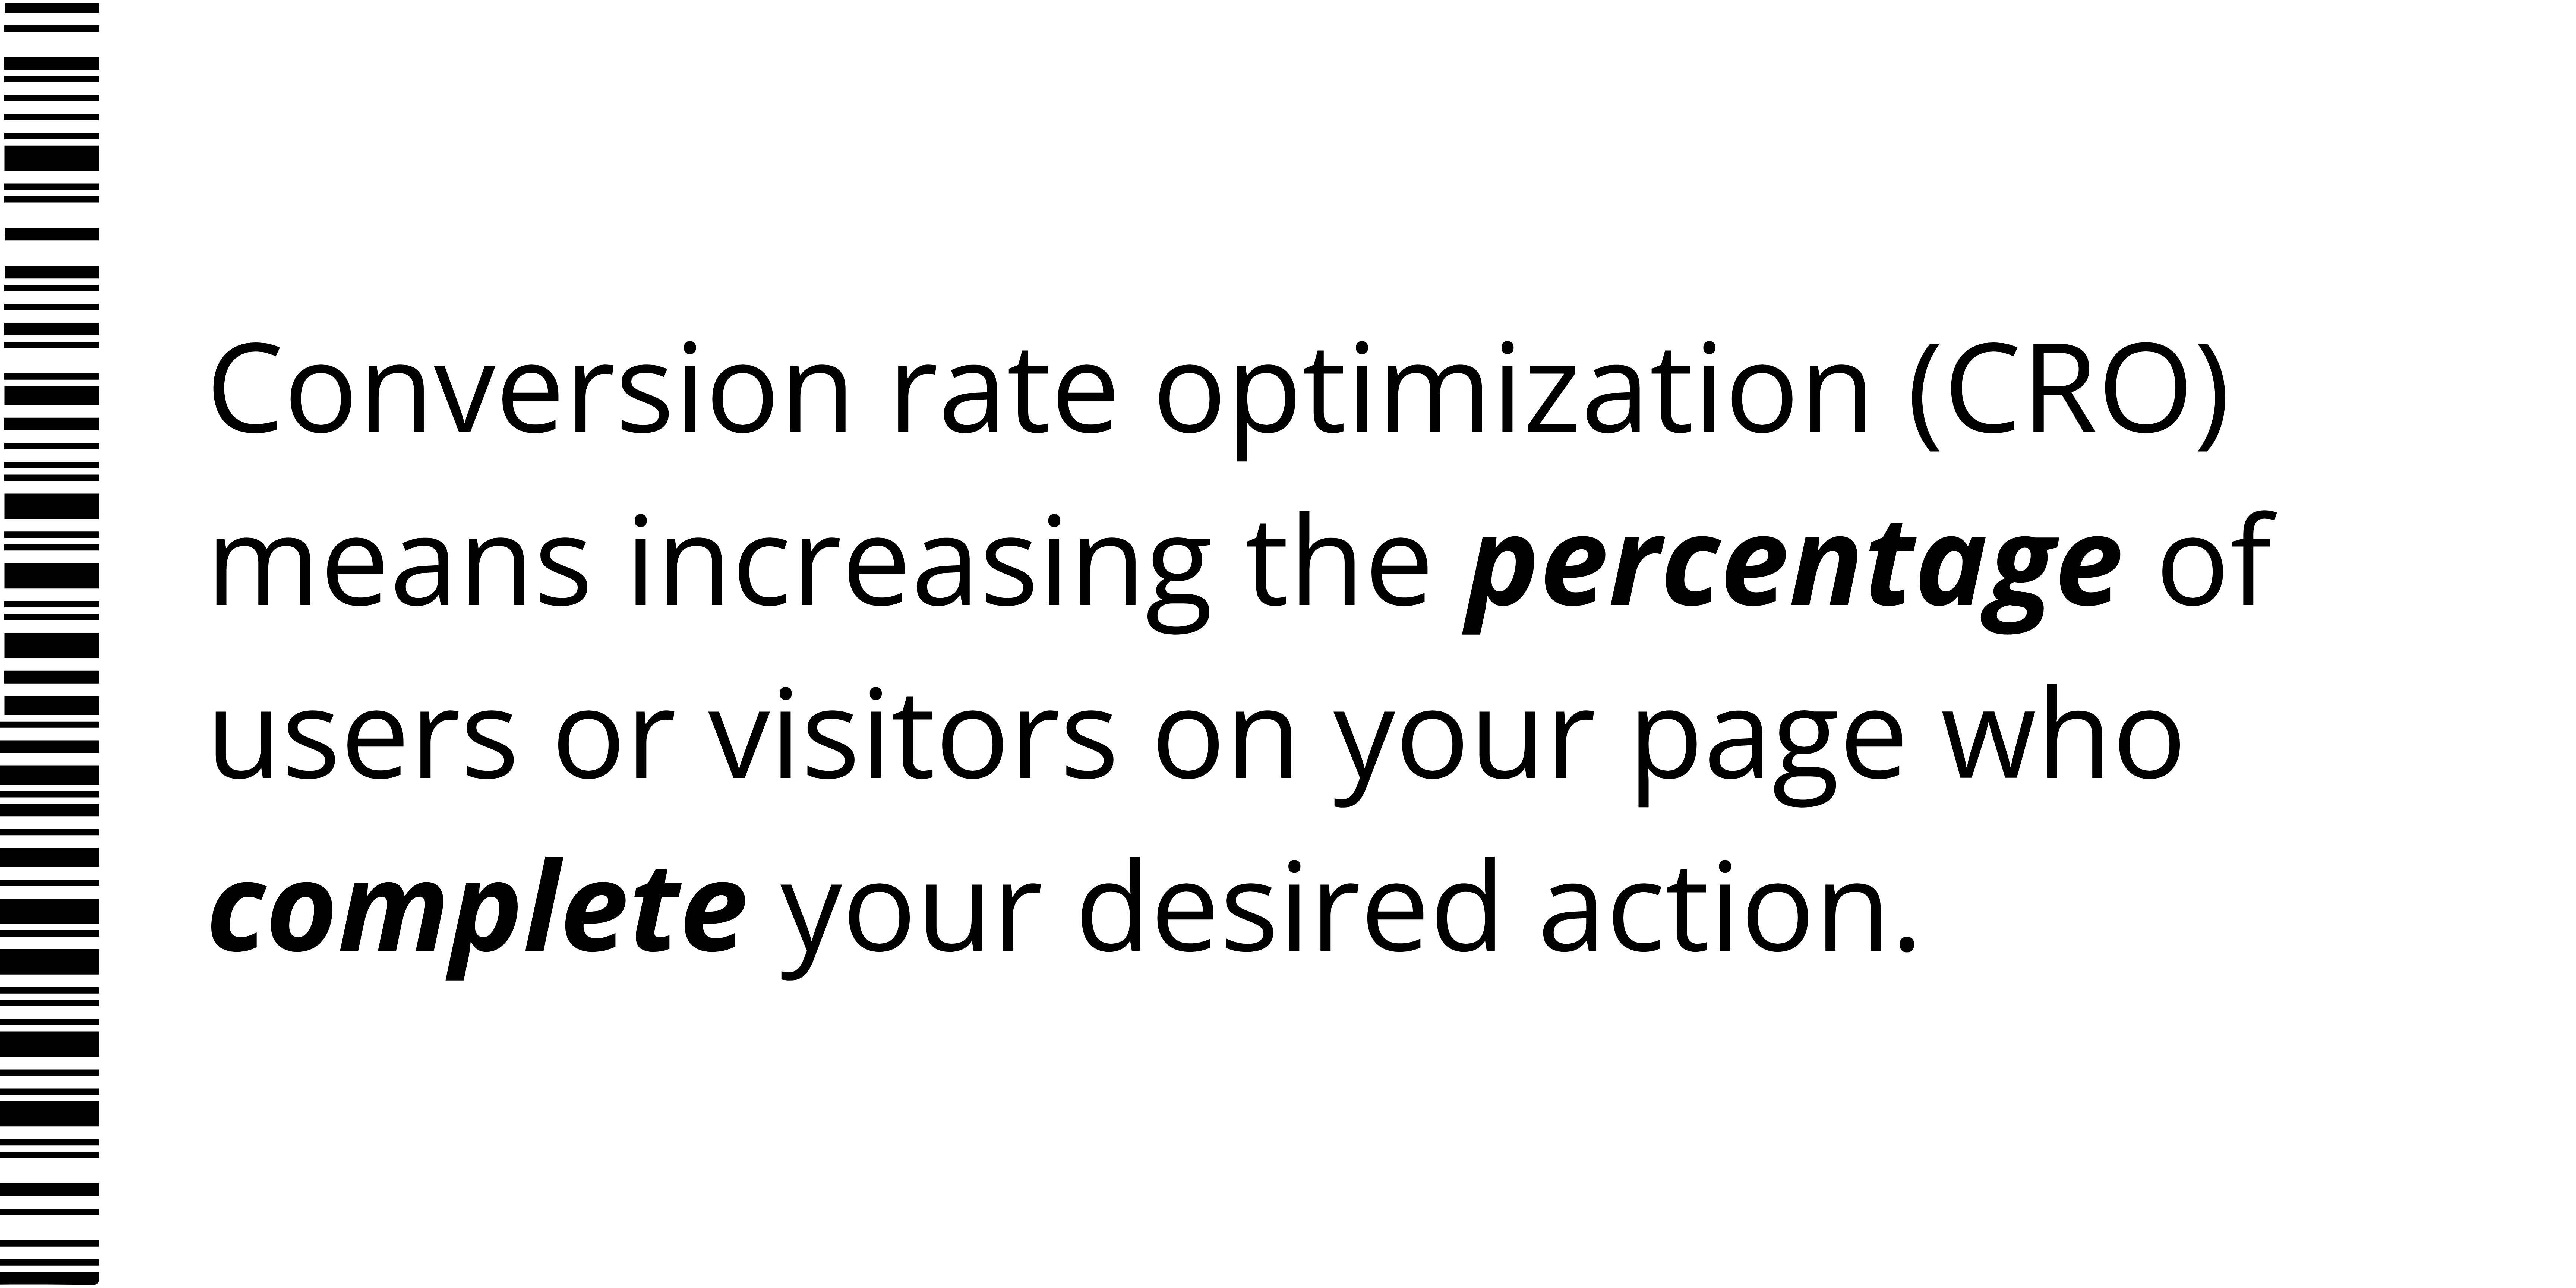 What is Conversion Rate Optimization